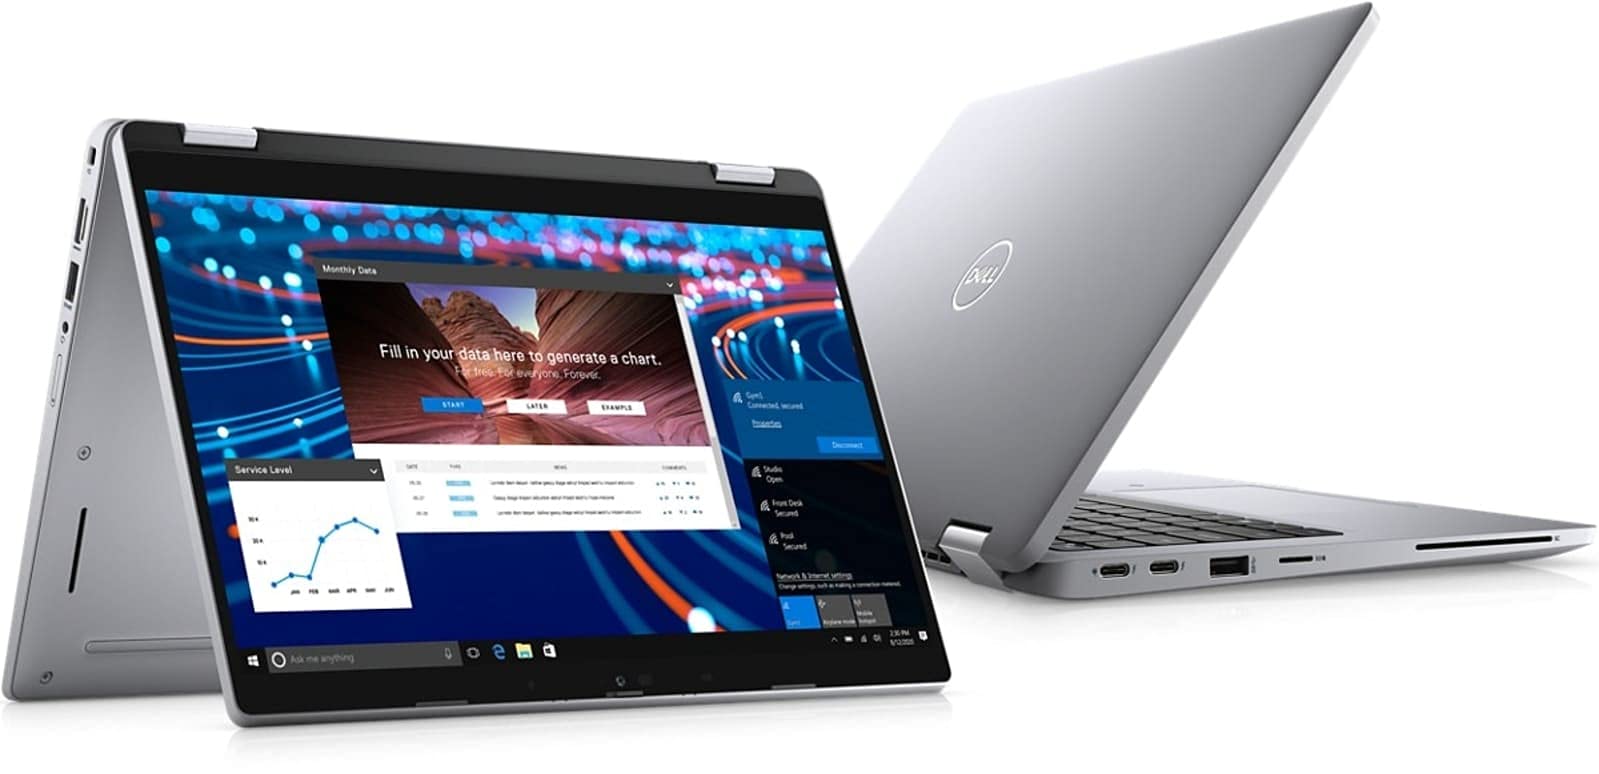 Dell Latitude 5000 5320 2-in-1 (2021) | 13.3" FHD Touch | Core i7 - 128GB SSD - 16GB RAM | 4 Cores @ 4.4 GHz - 11th Gen CPU Win 10 Pro (Renewed)